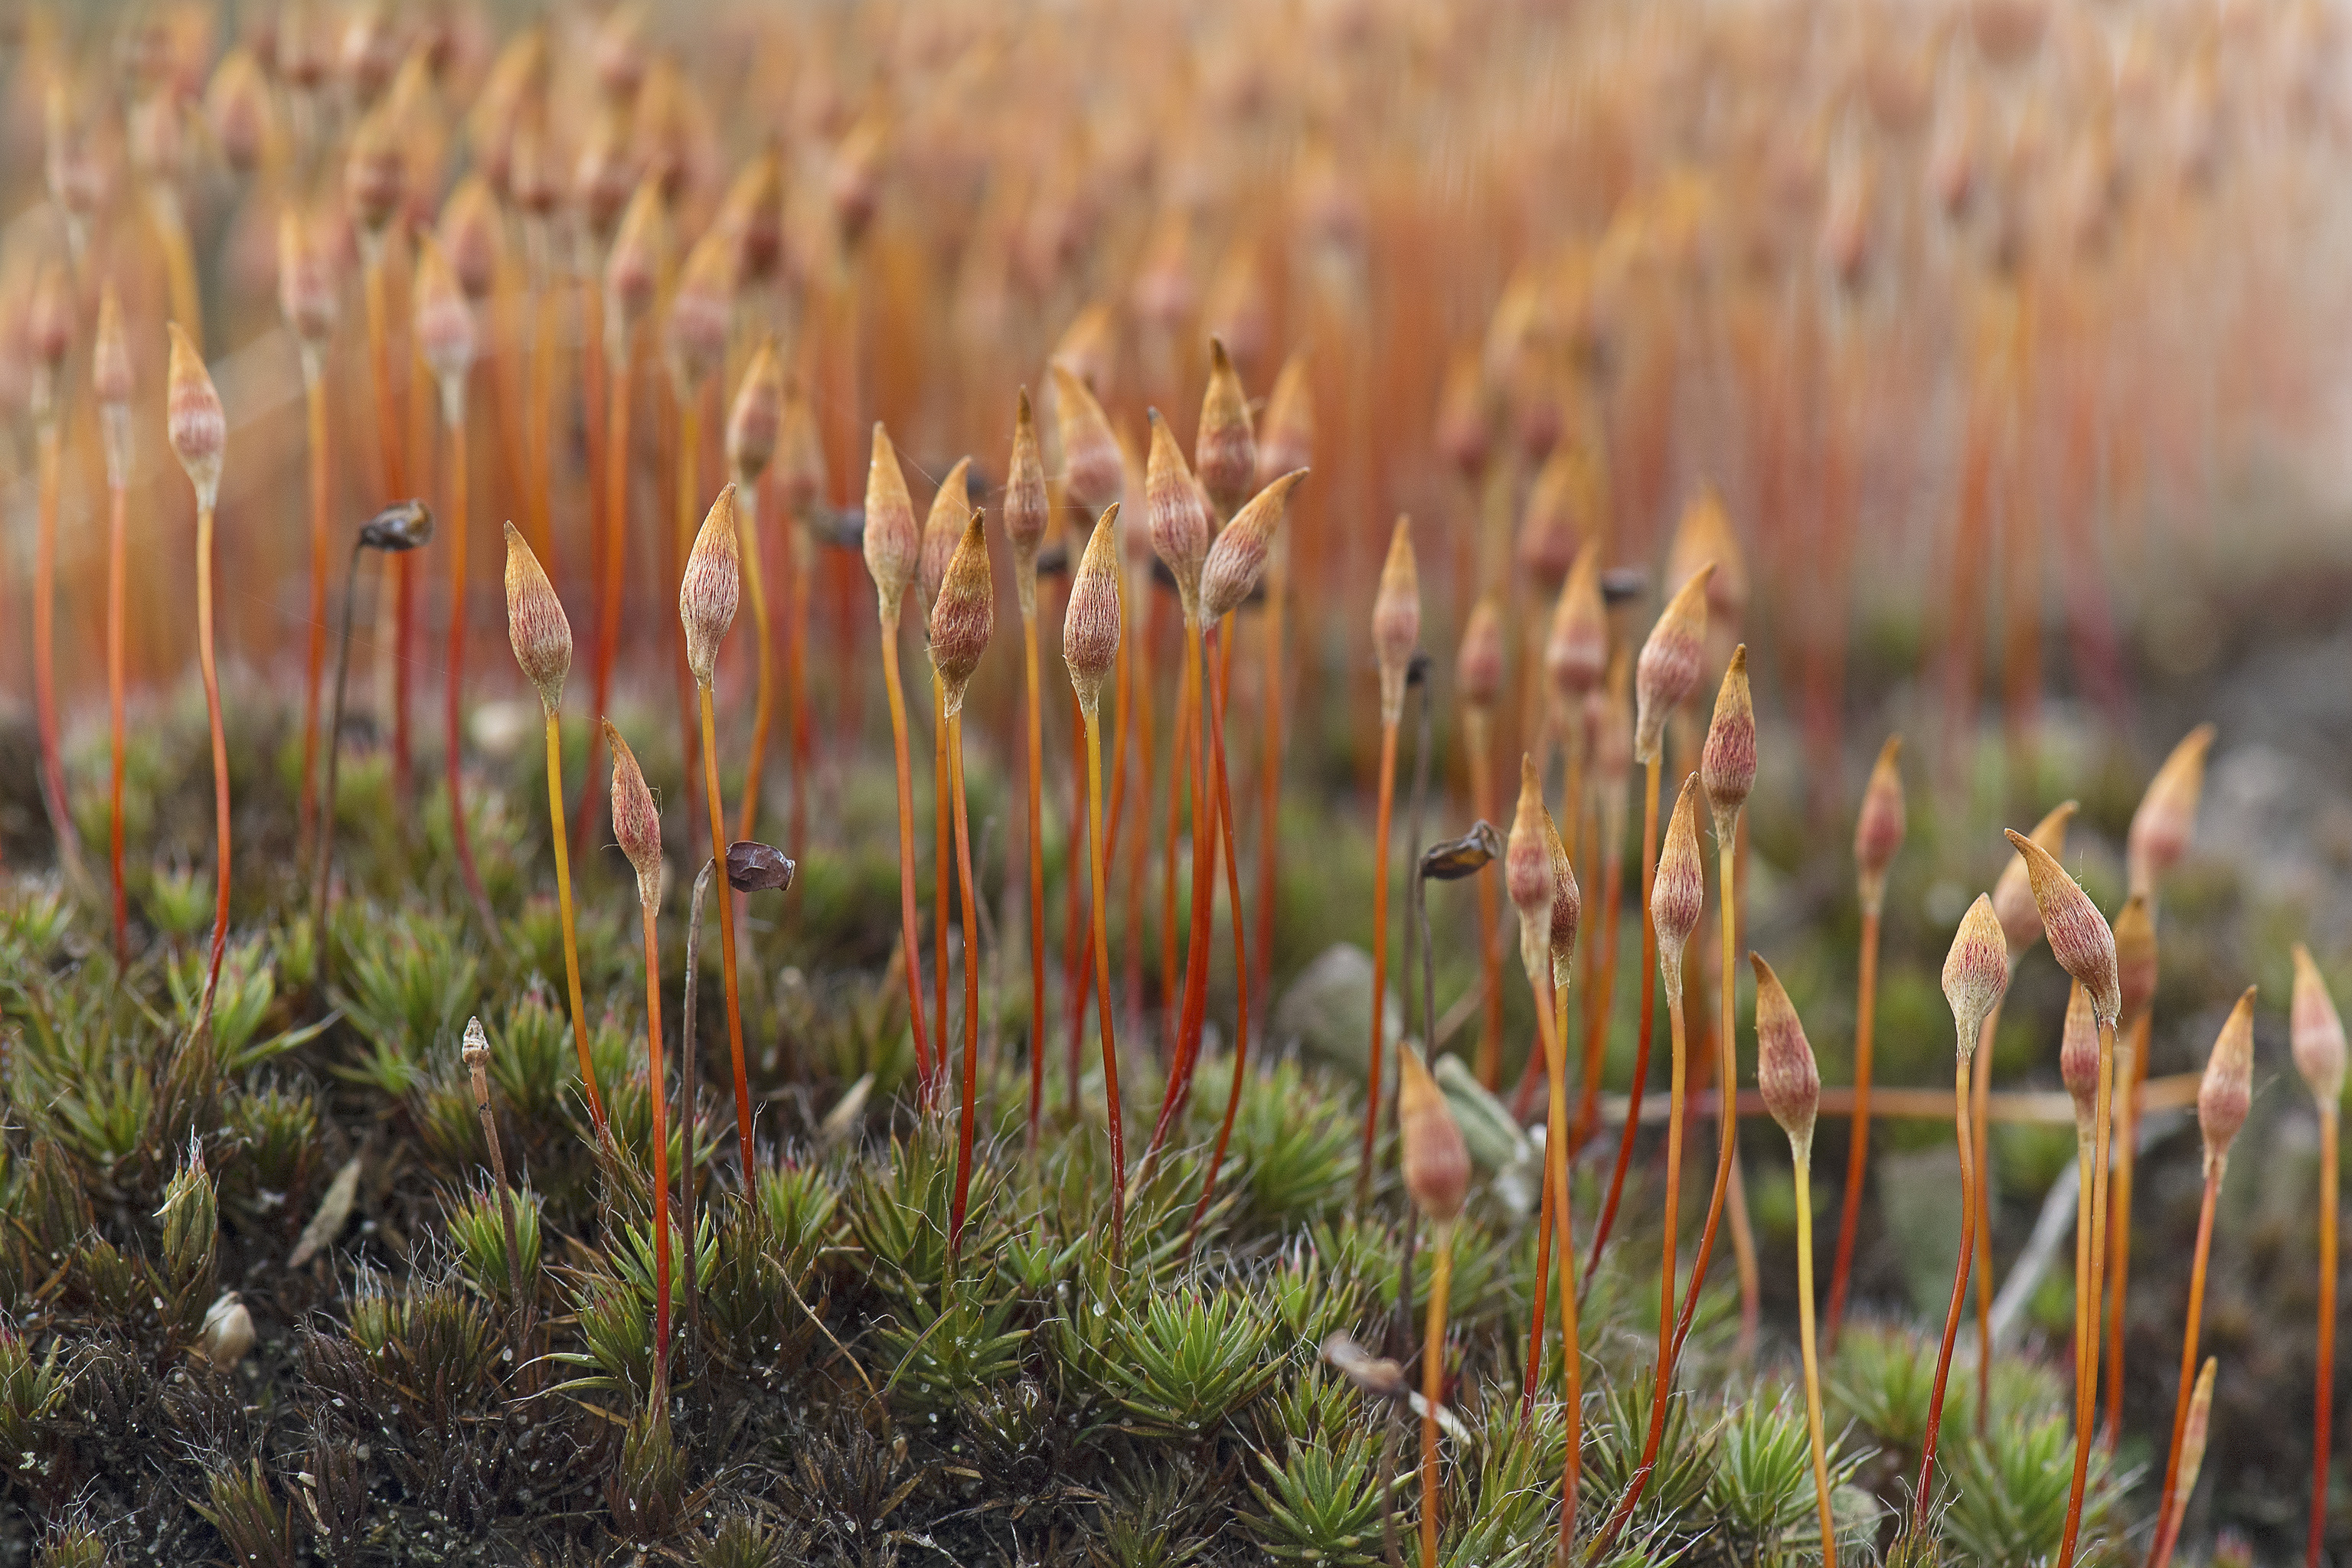 A forest of haircap moss ...